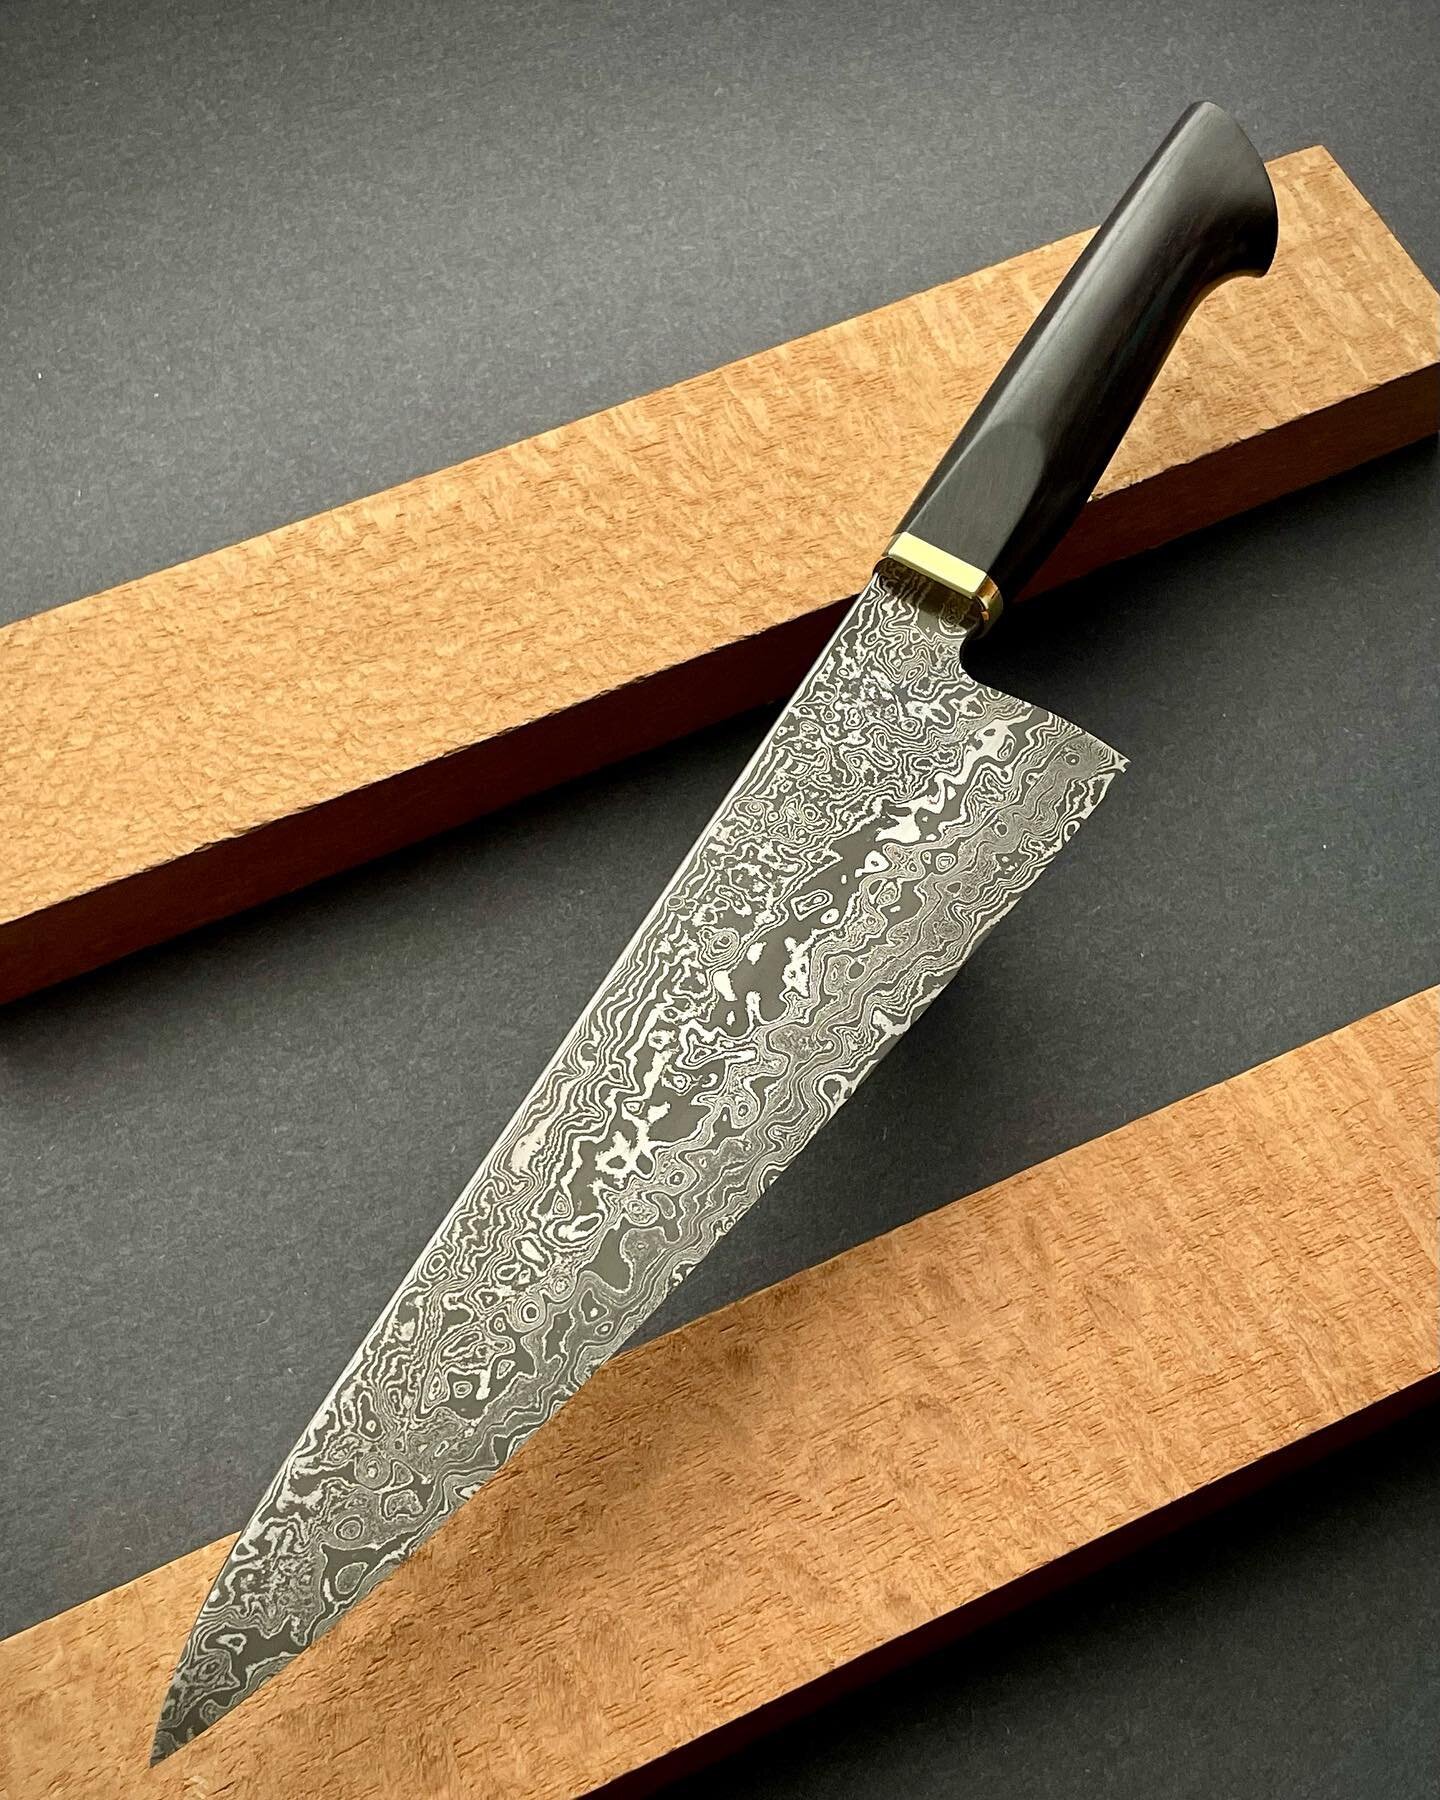 A 220mm gyuto in beautiful damascus steel made by @salemstraub. The steel is 3v/15n20 heat treated to 63hrc, the handle is African Blackwood with a brass bolster. It&rsquo;s been awhile since I have worked with Damascus steel, let me know if you like